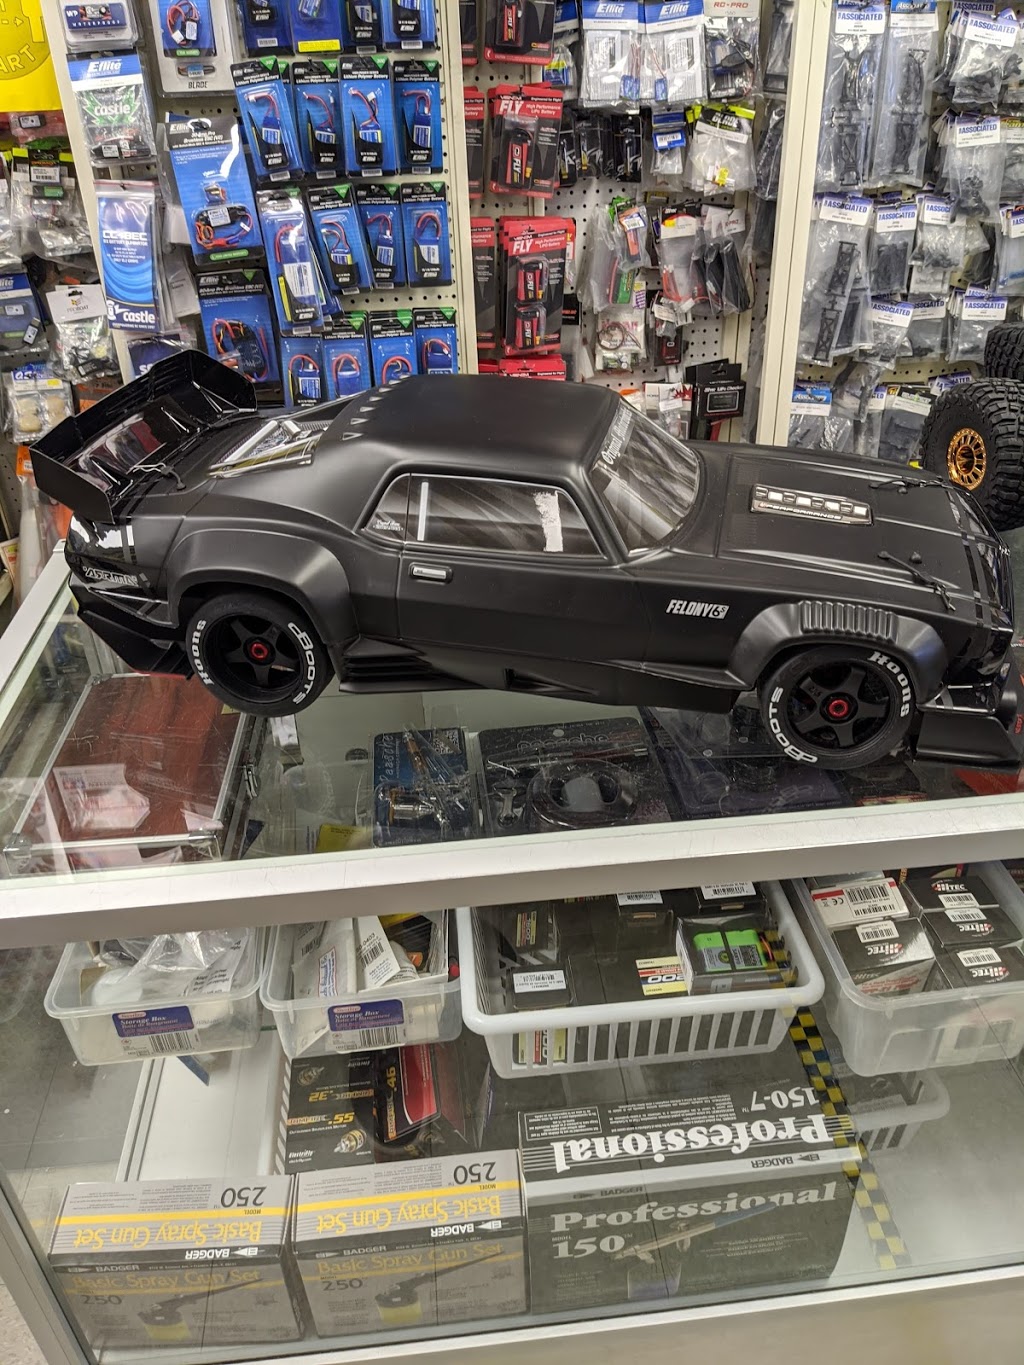 Hobby Hobby | store | 128 Queen St S #22, Mississauga, ON L5M 1K8, Canada | 9058587978 OR +1 905-858-7978